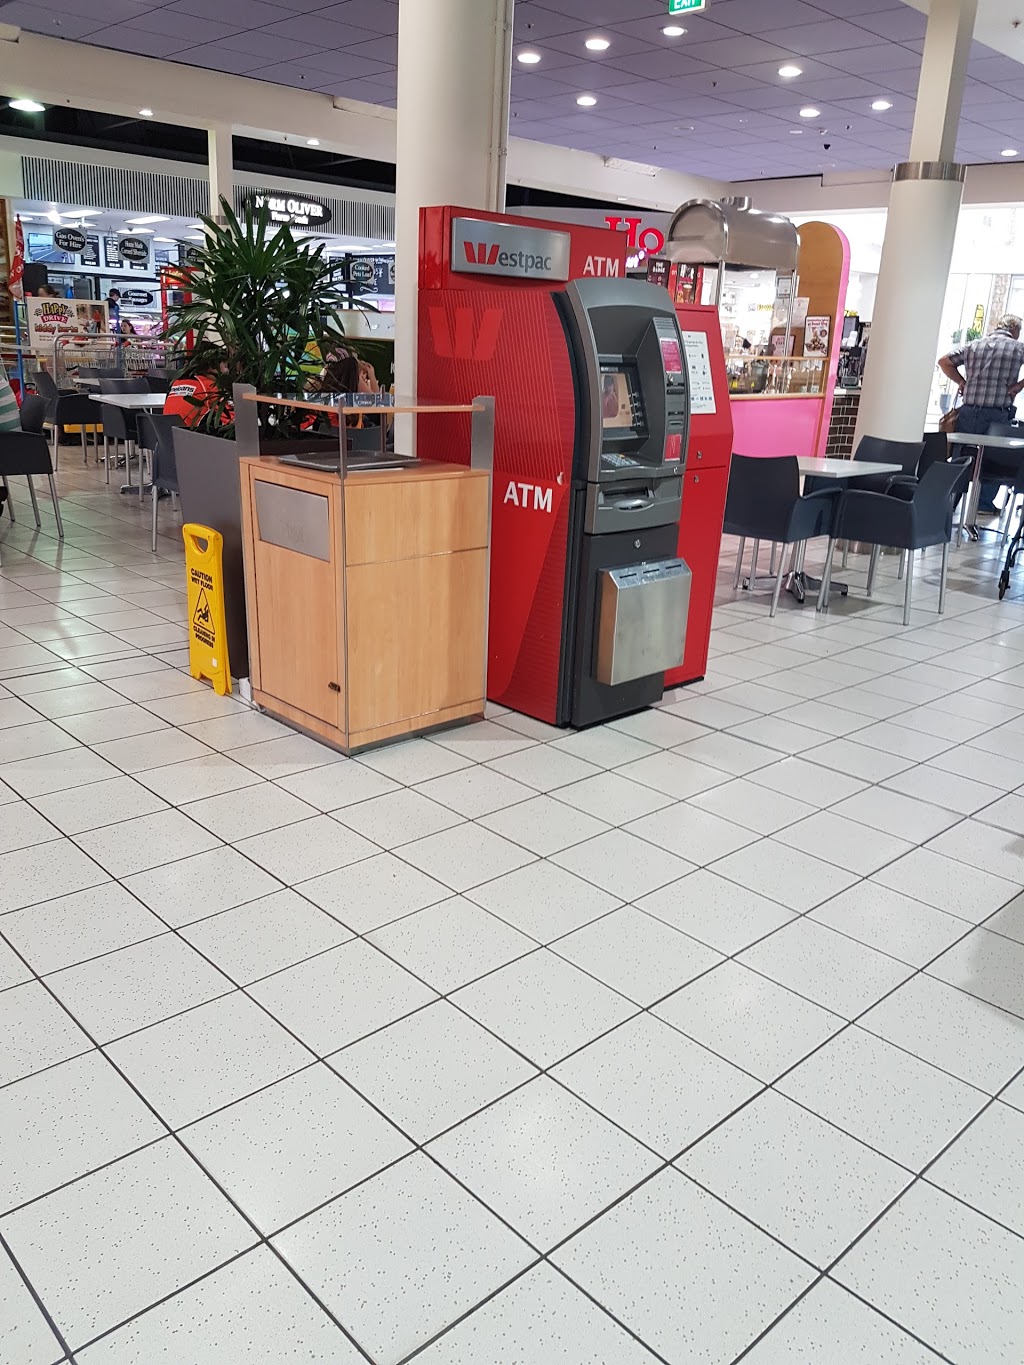 Westpac ATM | bank | Near Safeway, Lot 2, 1, Centre Valley Rd, Morwell VIC 3840, Australia | 132032 OR +61 132032